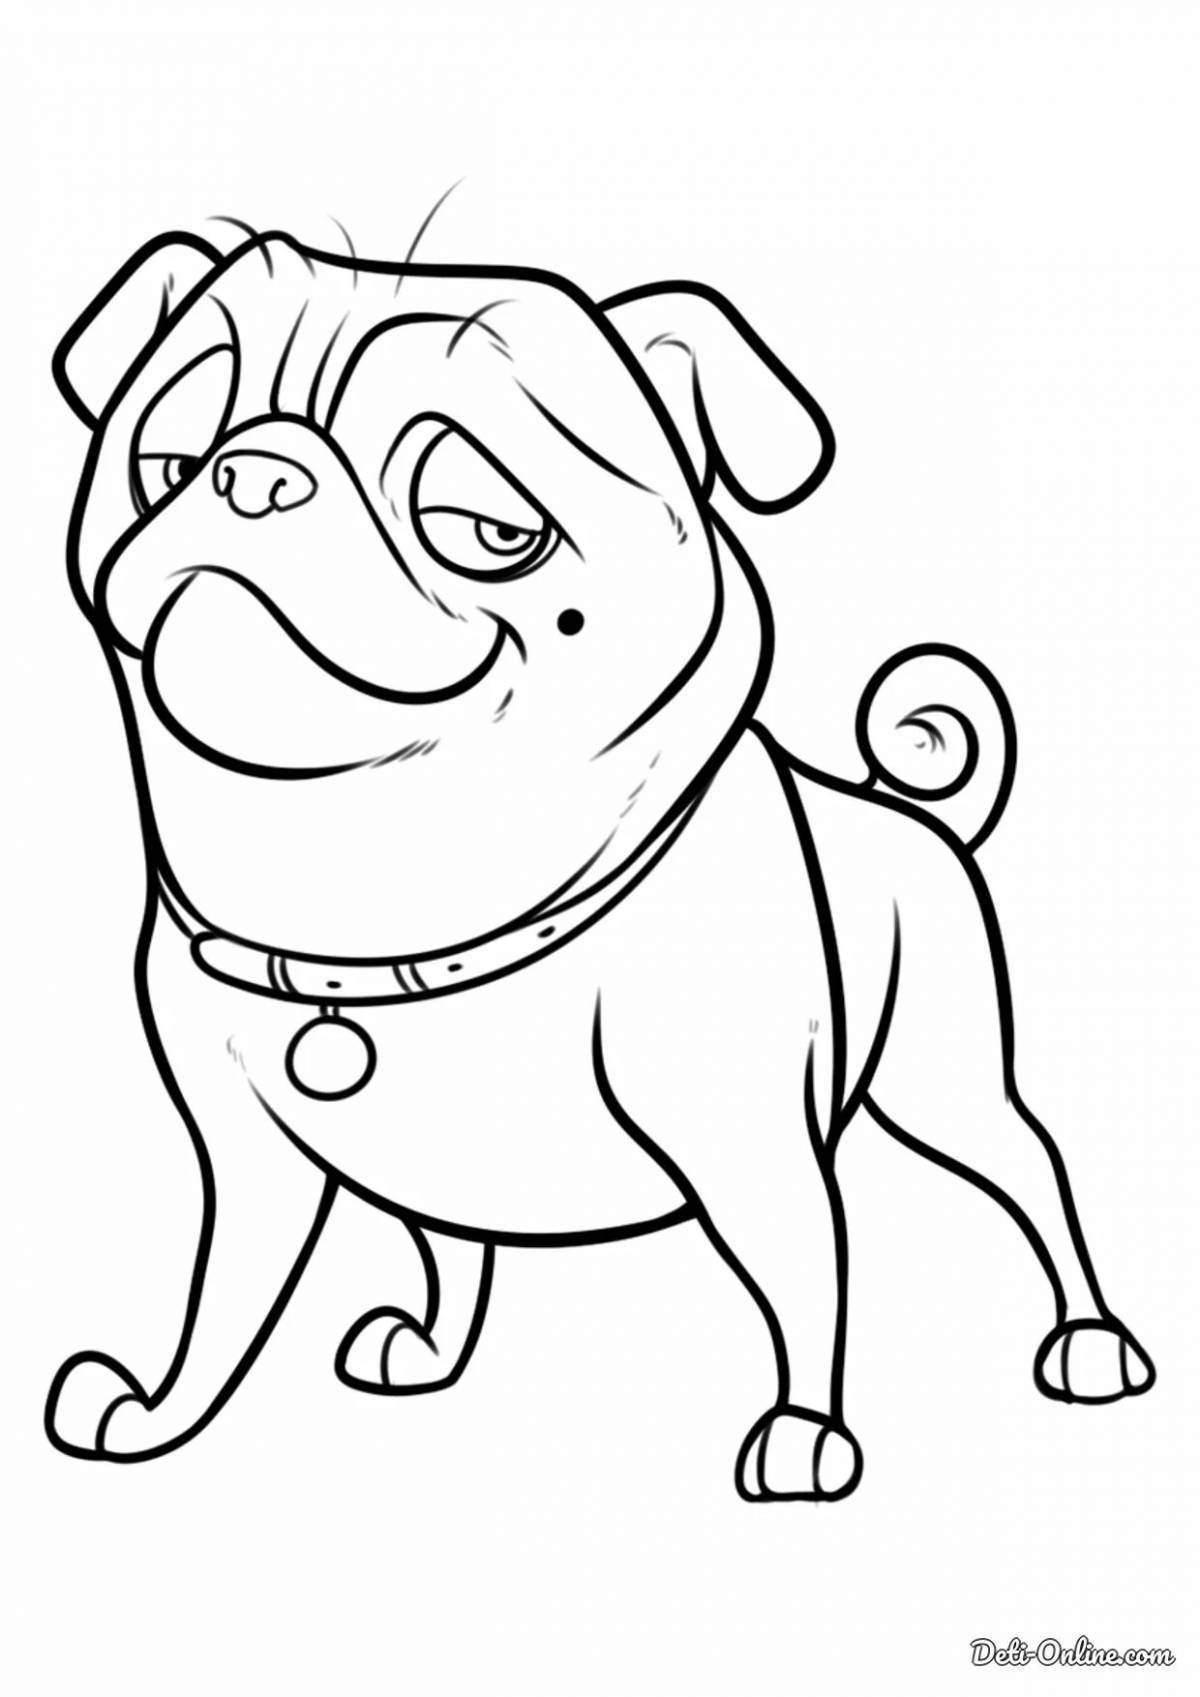 Coloring page calm pug